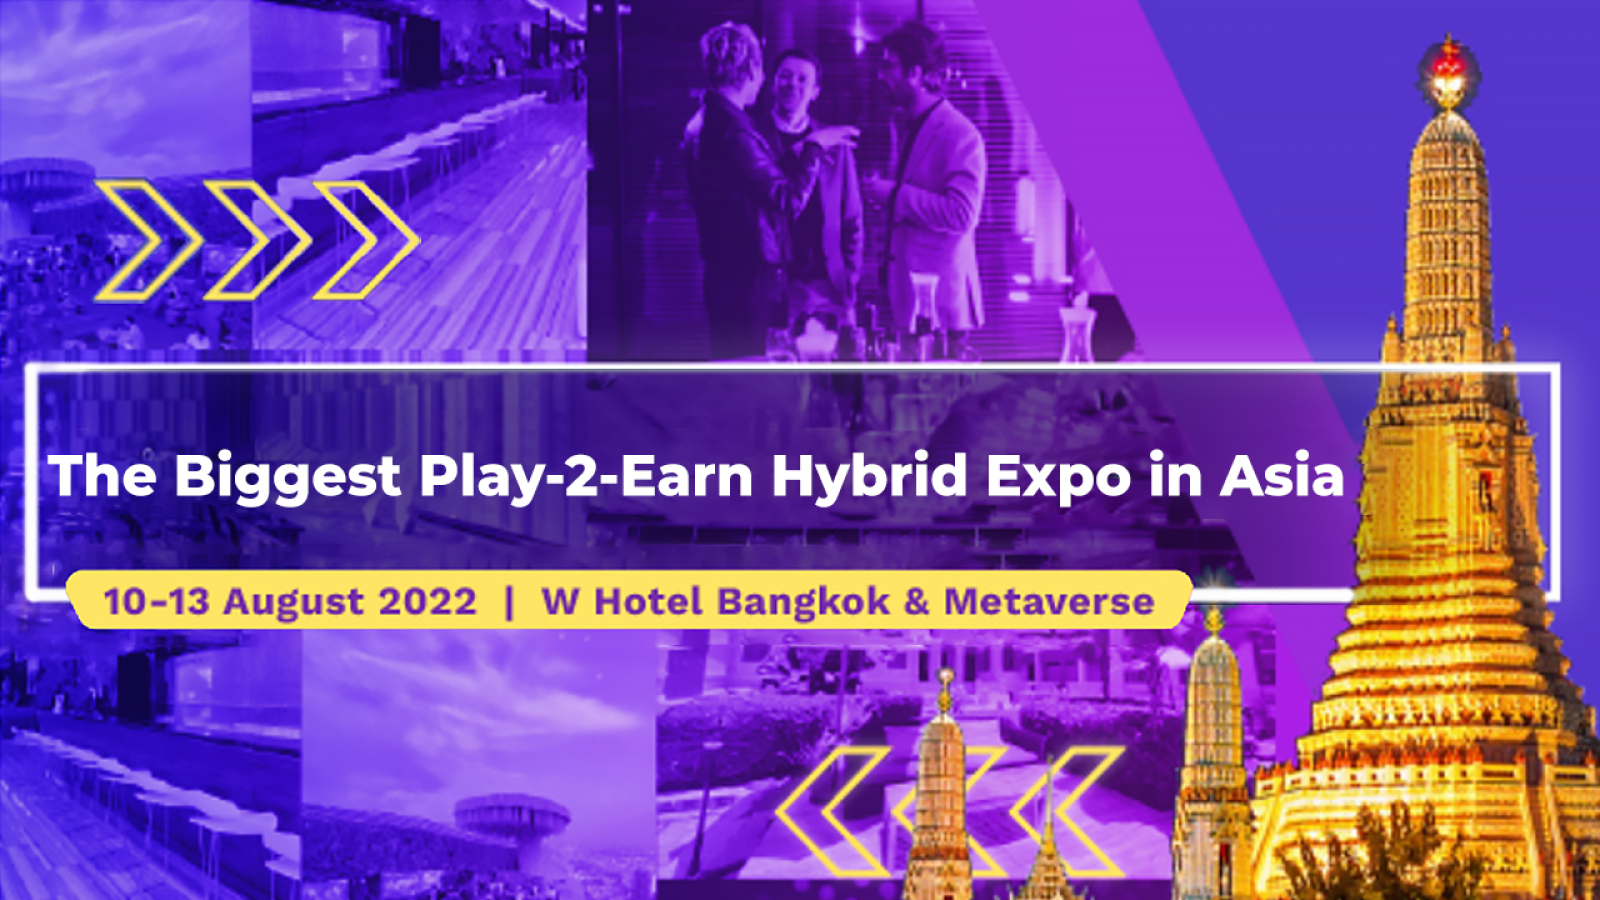 Asia’s Largest Play-2-Earn Crypto Expo to Kick Off in Bangkok August 10 to 13